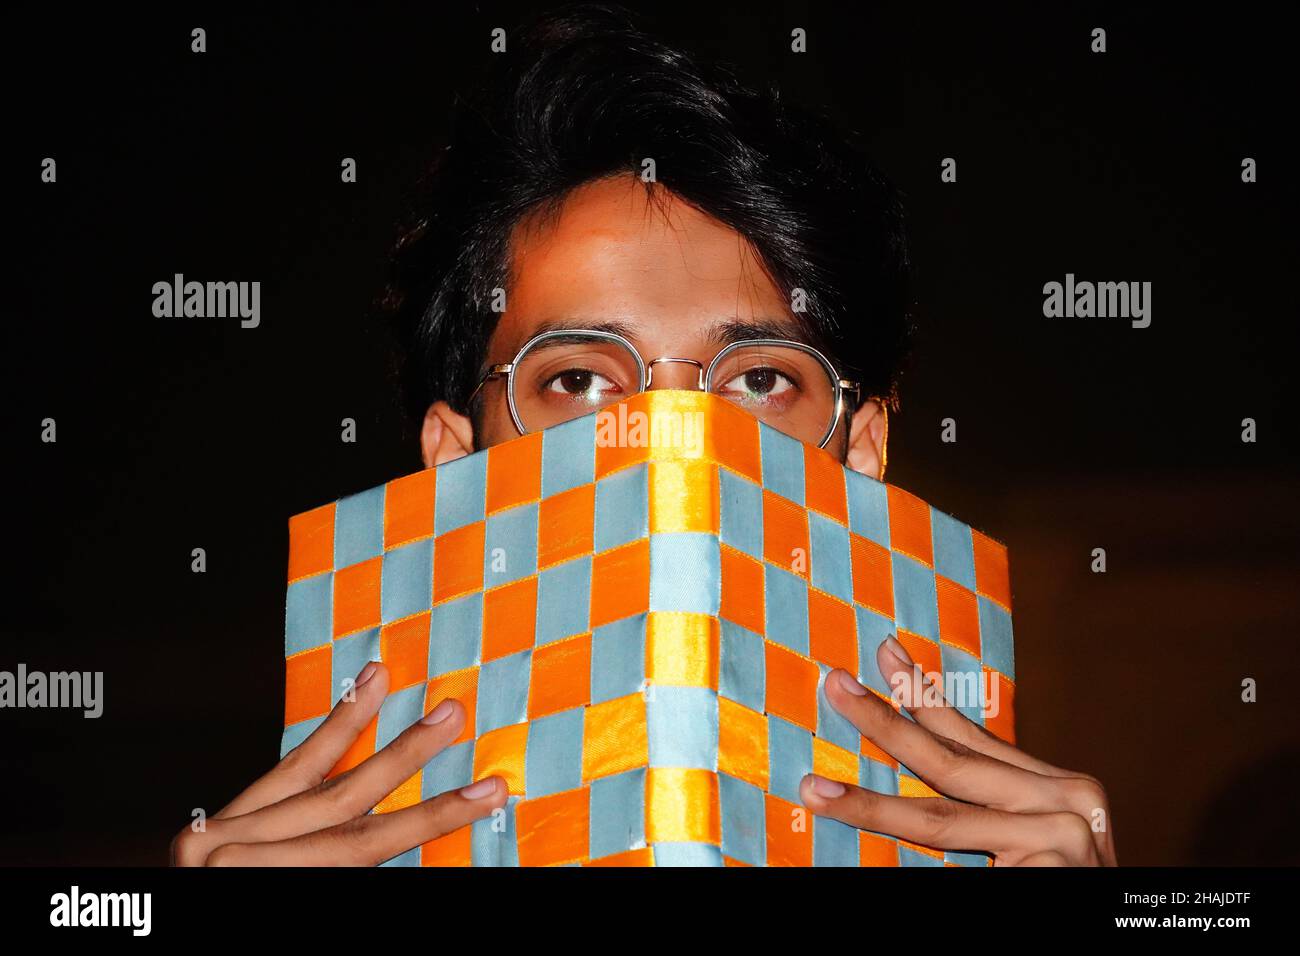 man cover face by diary and showing half face Stock Photo